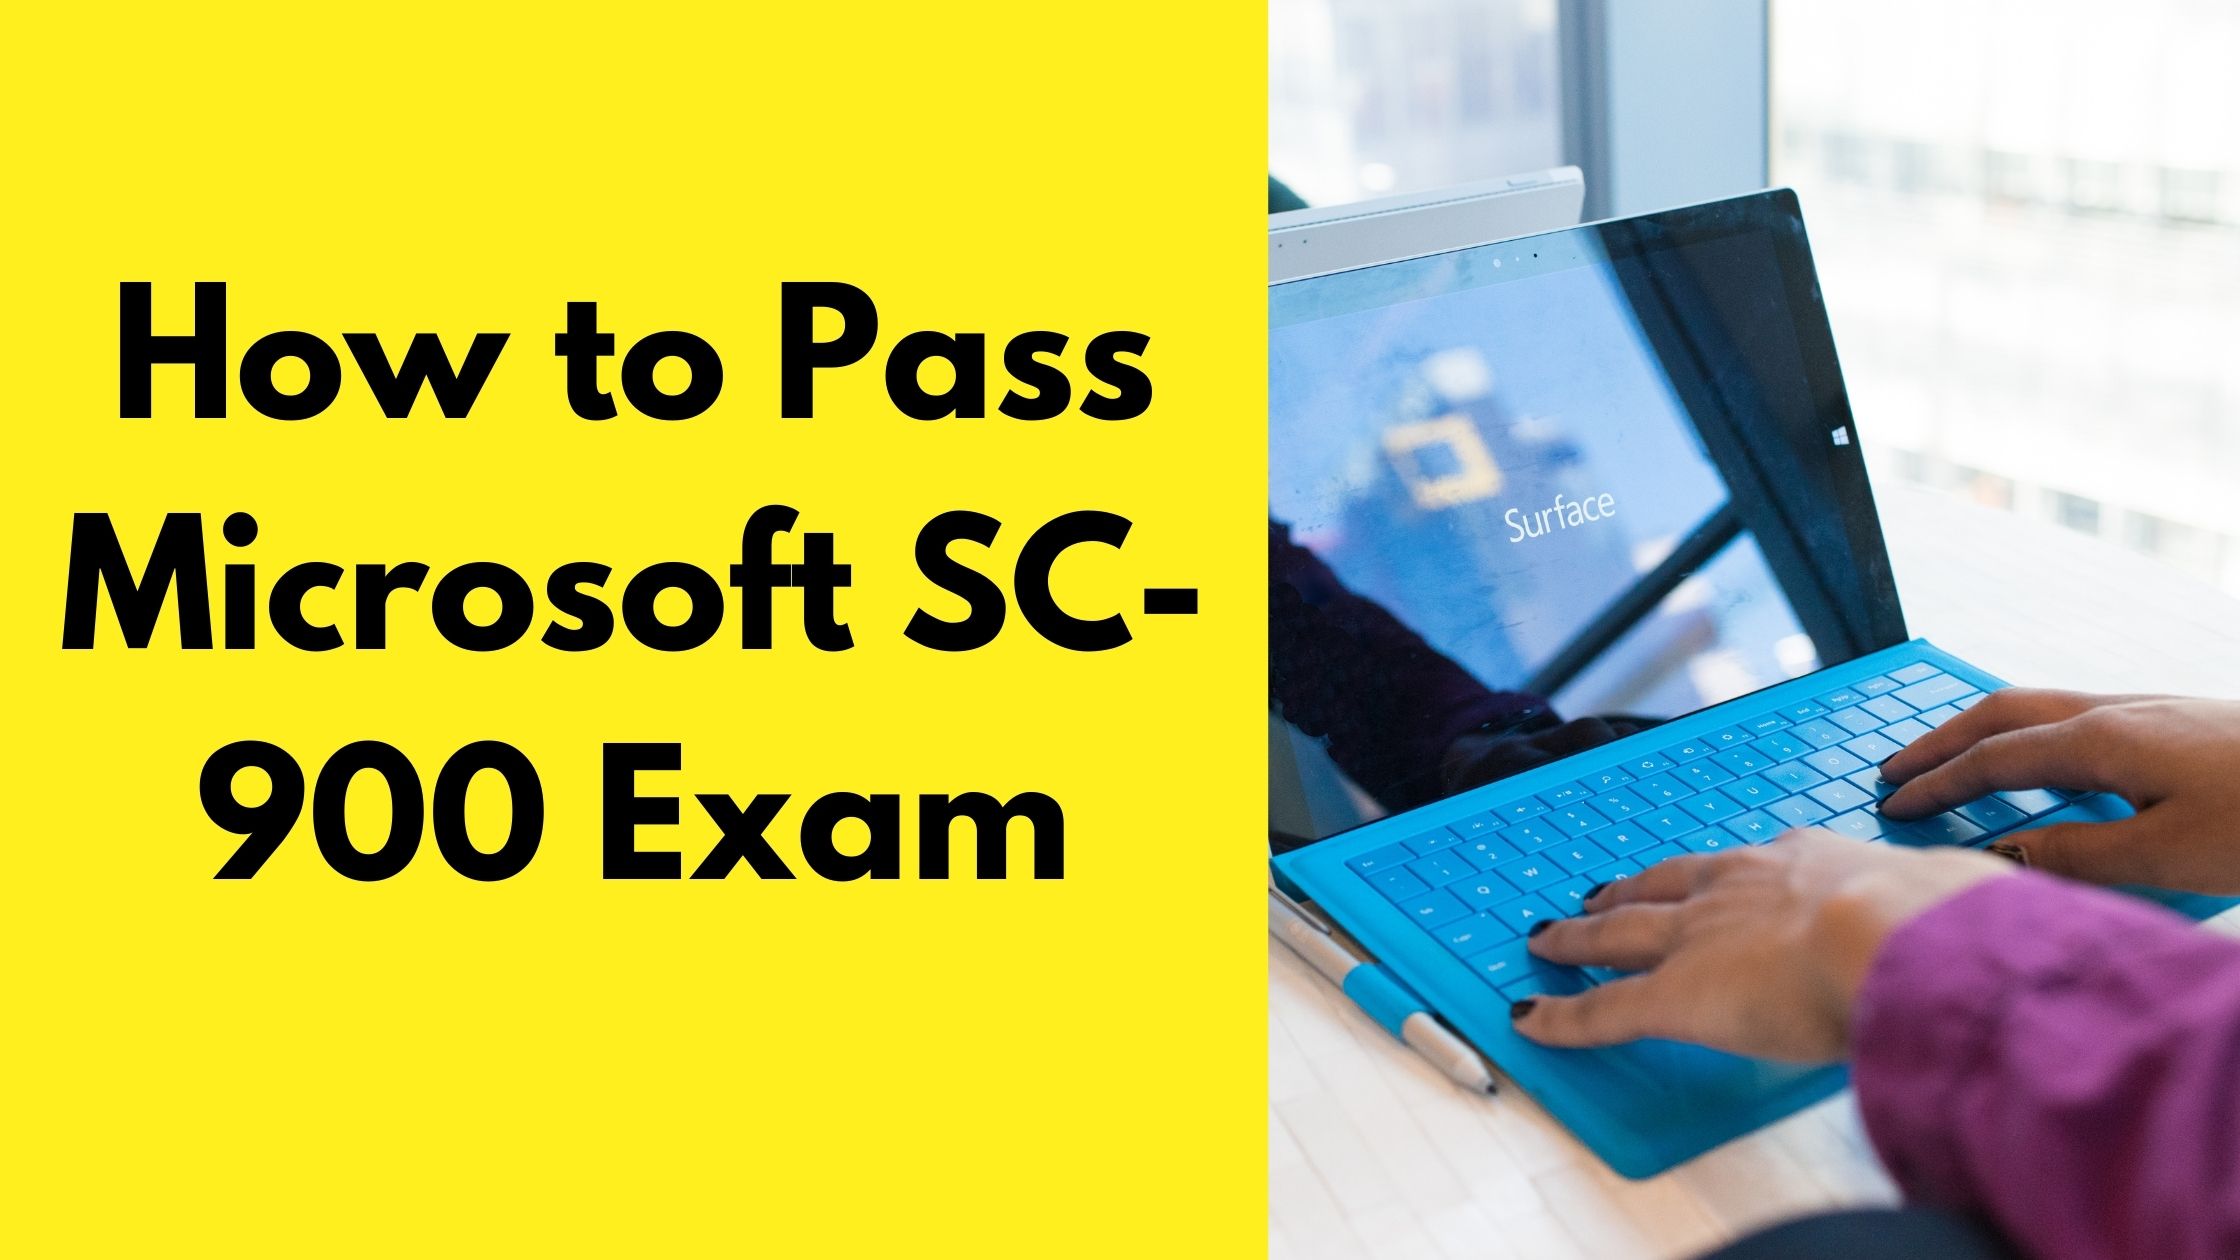 How Training Courses and Practice Tests Increase Your Chances of Passing Microsoft SC-900 Exam?